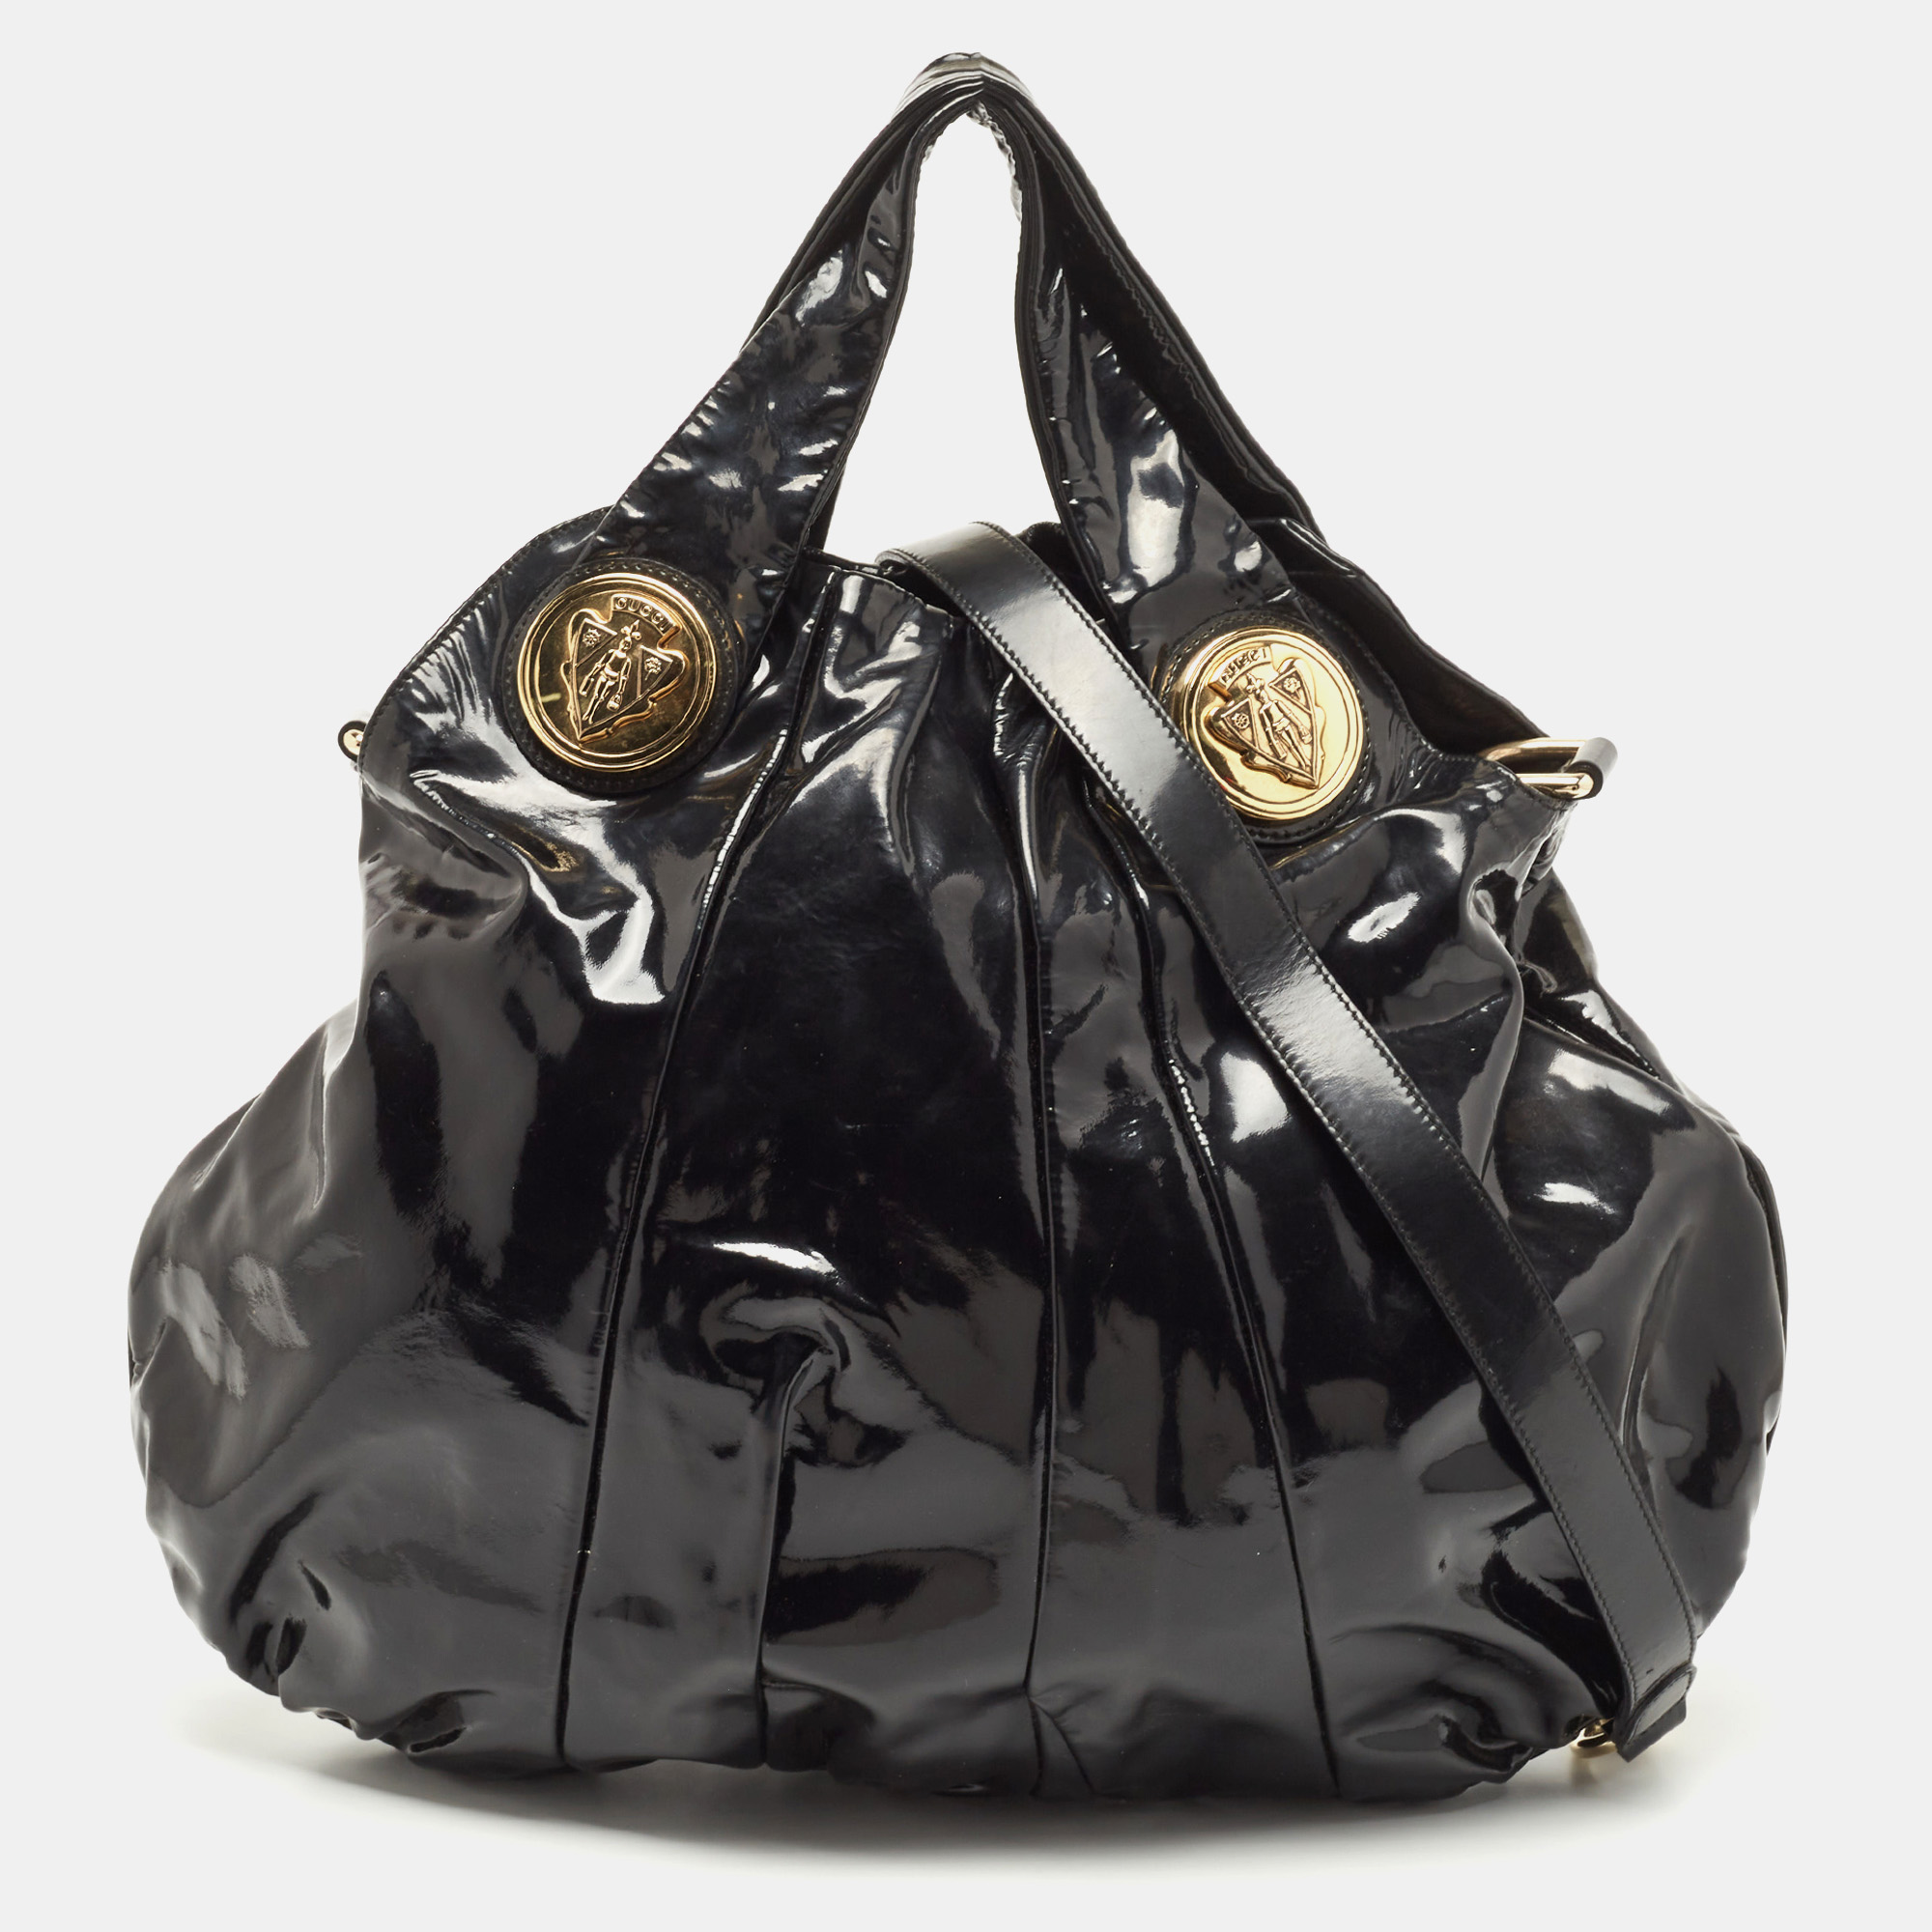 Gucci Black Patent Leather Large Hysteria Hobo